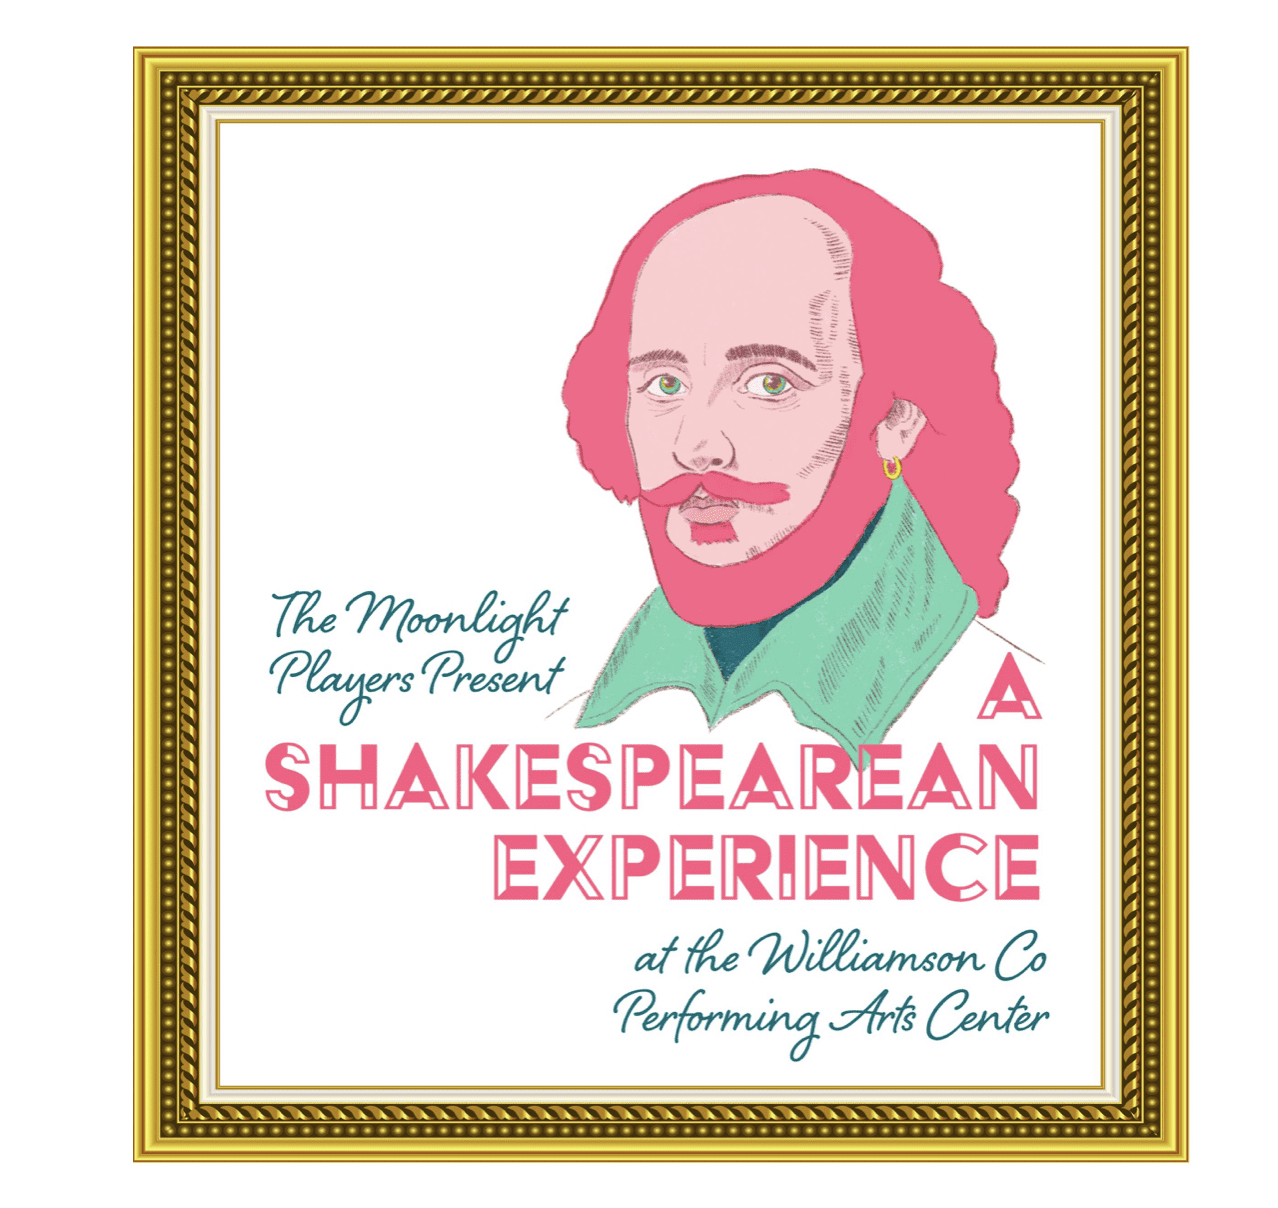 A Shakespearean Experience, theater show in Franklin, TN